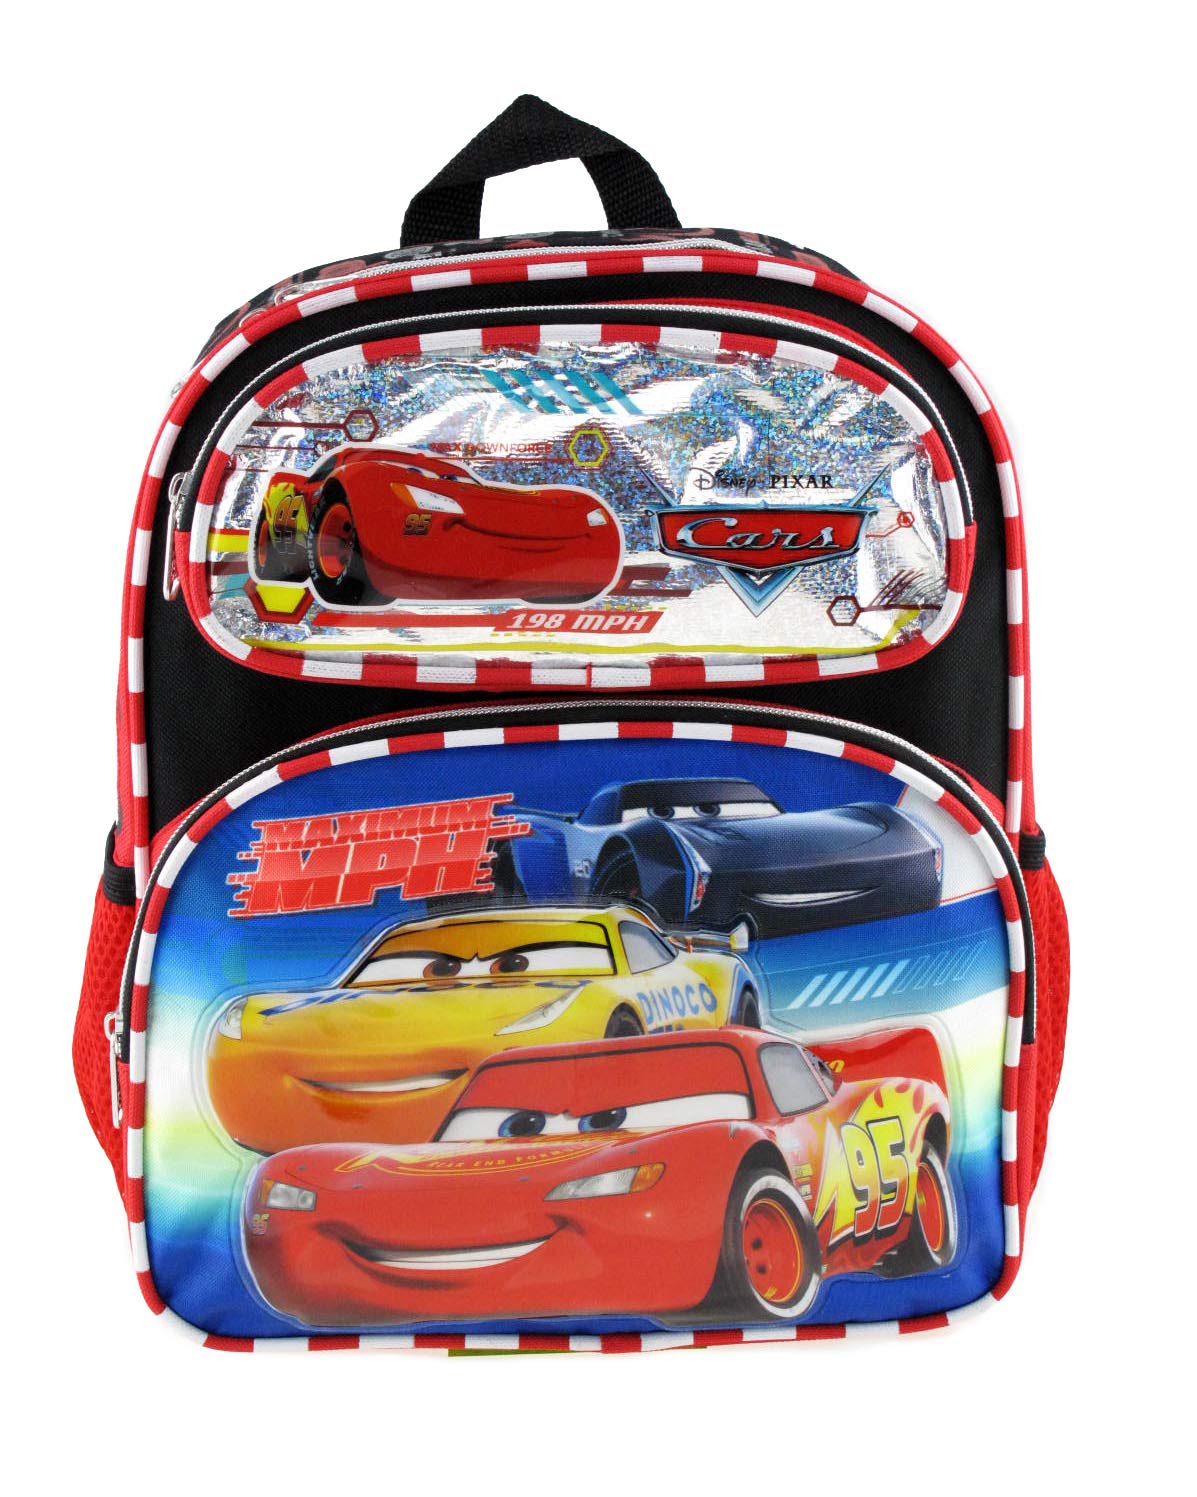 Small Backpack - Disney - Cars Top Engine 12" New 008673 - image 1 of 3